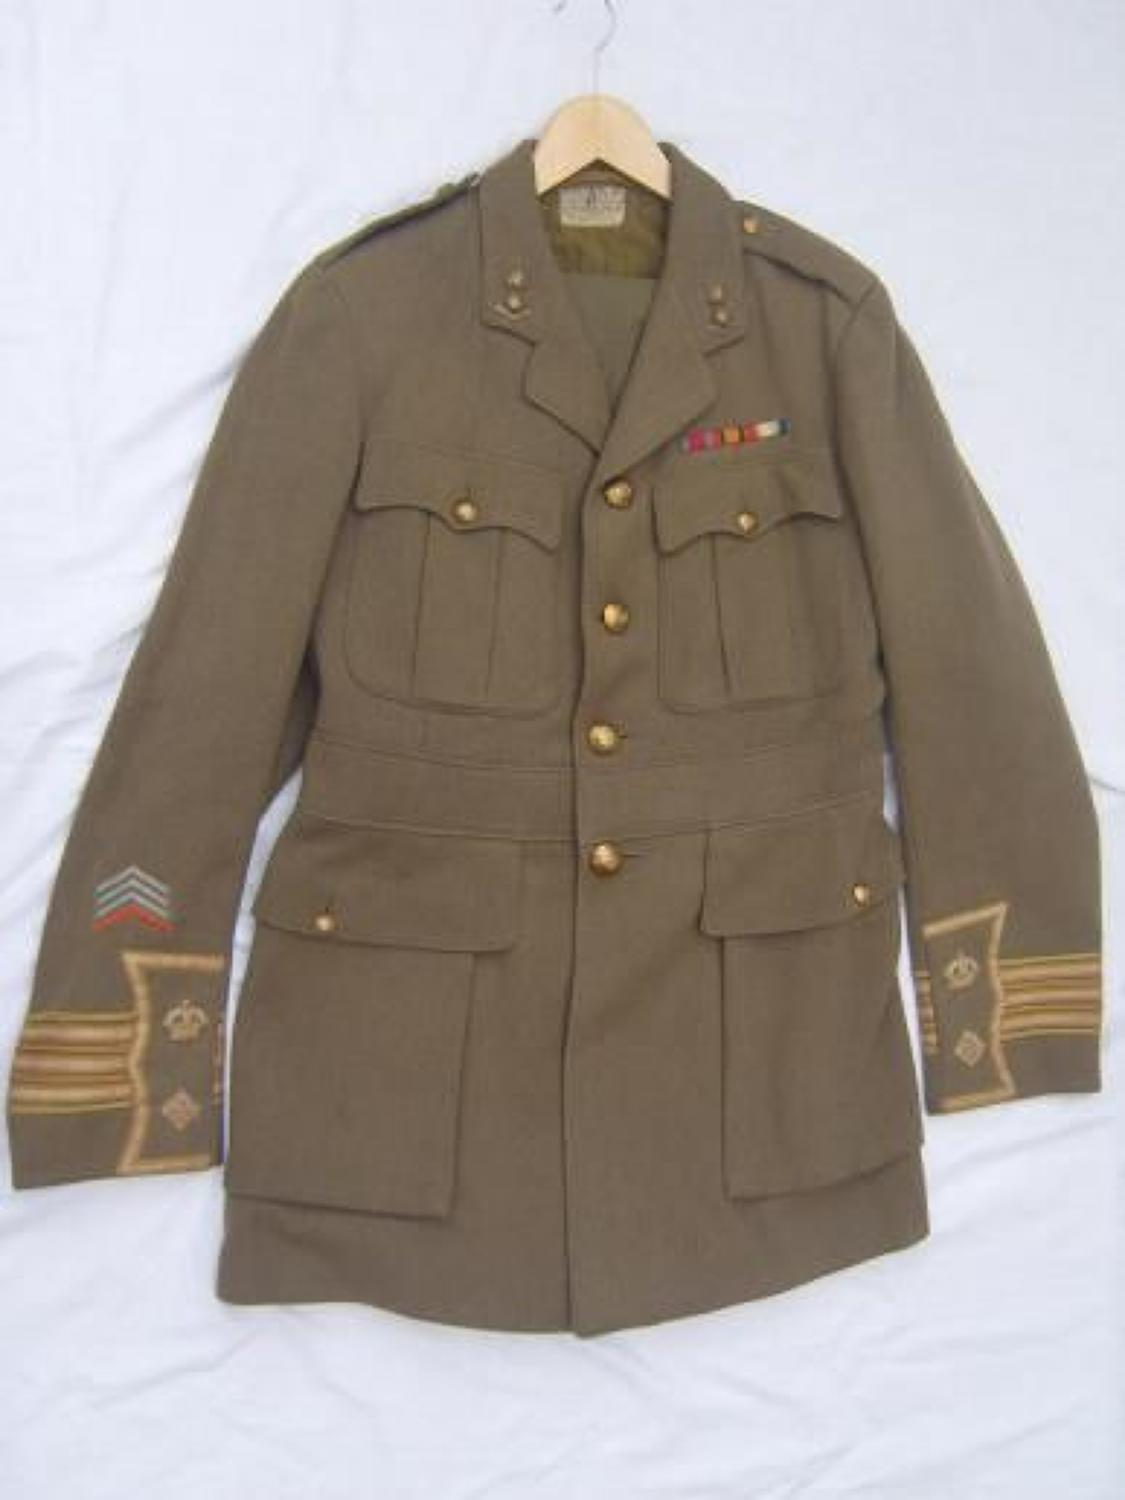 CUFF RANK TUNIC & TROUSERS TO LIEUTENANT COLONEL